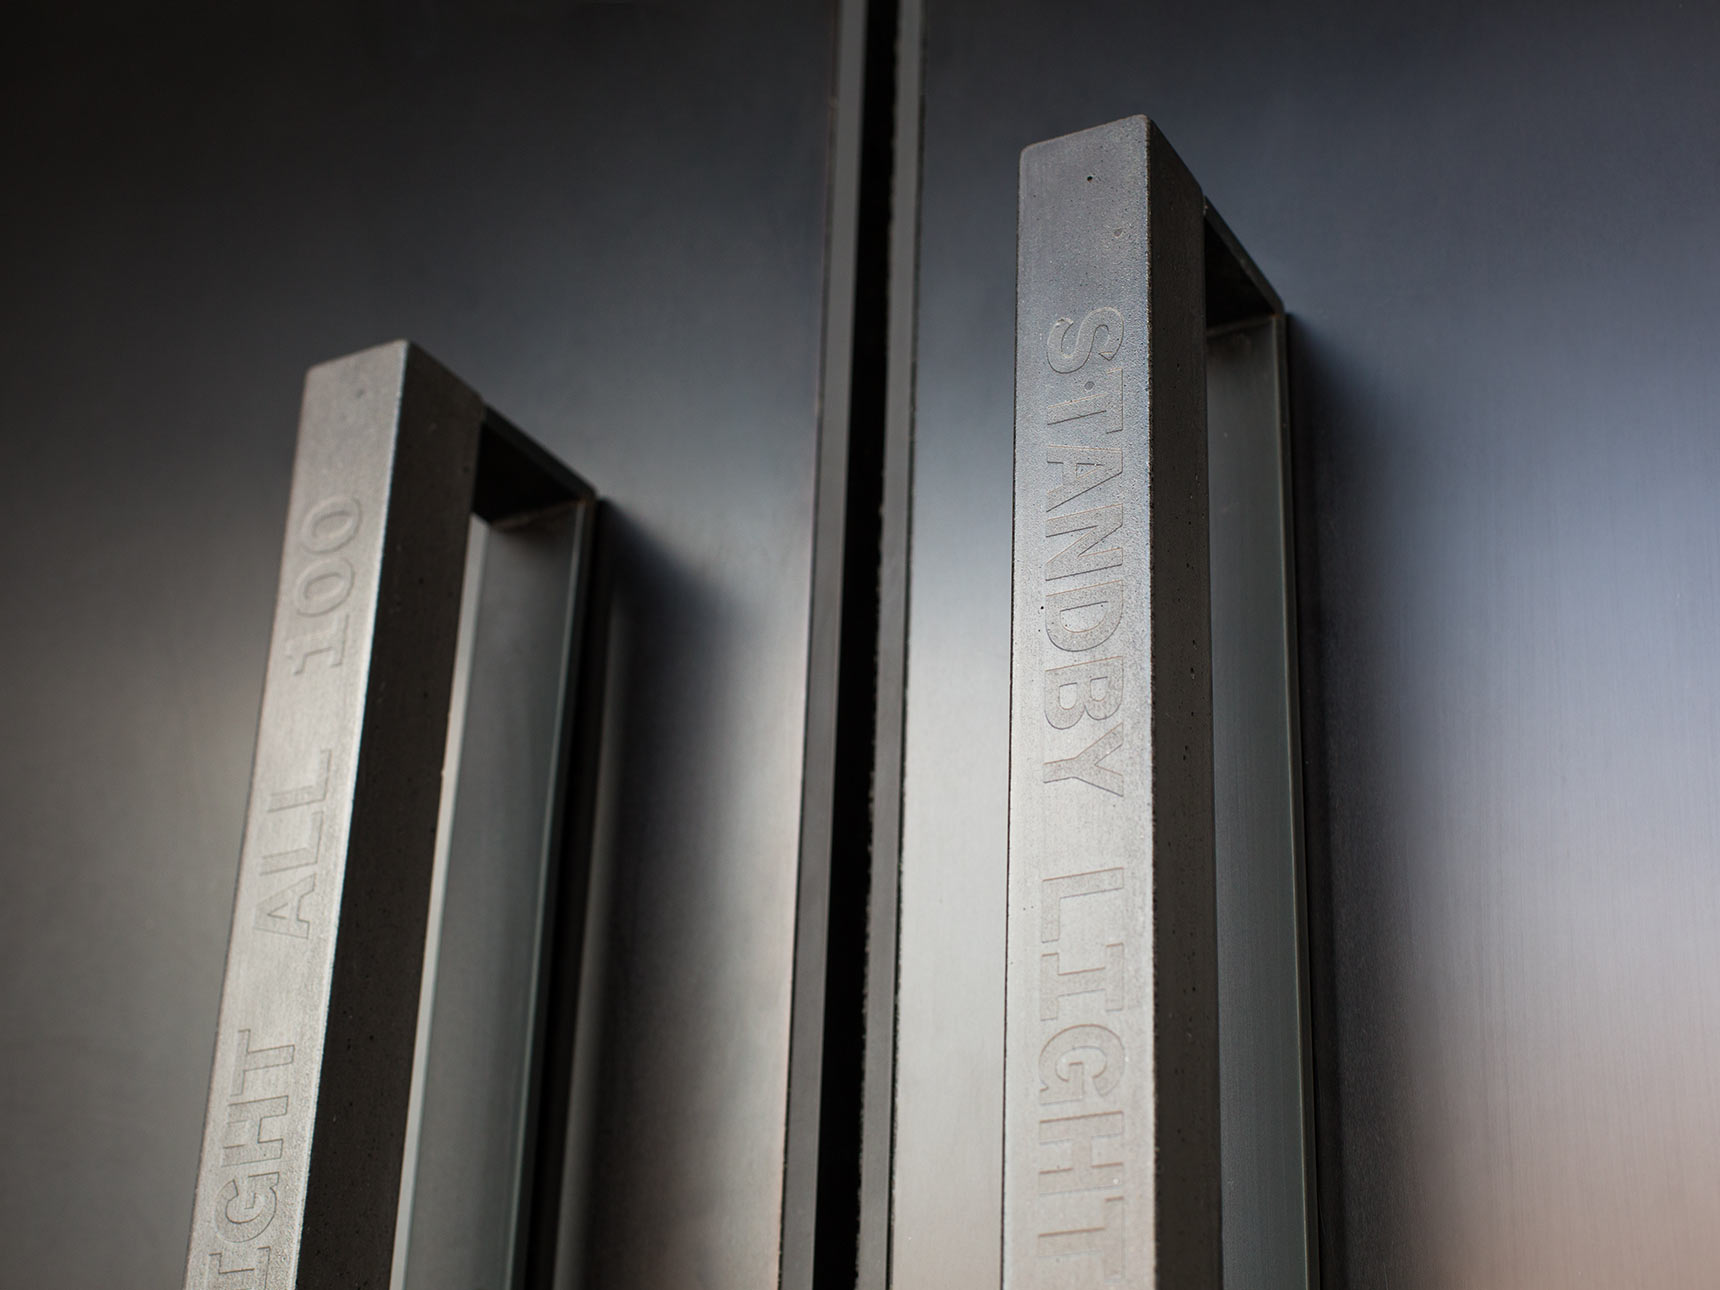 Cast black concrete door pulls with embossed text on the doorways to the Voxel Theater